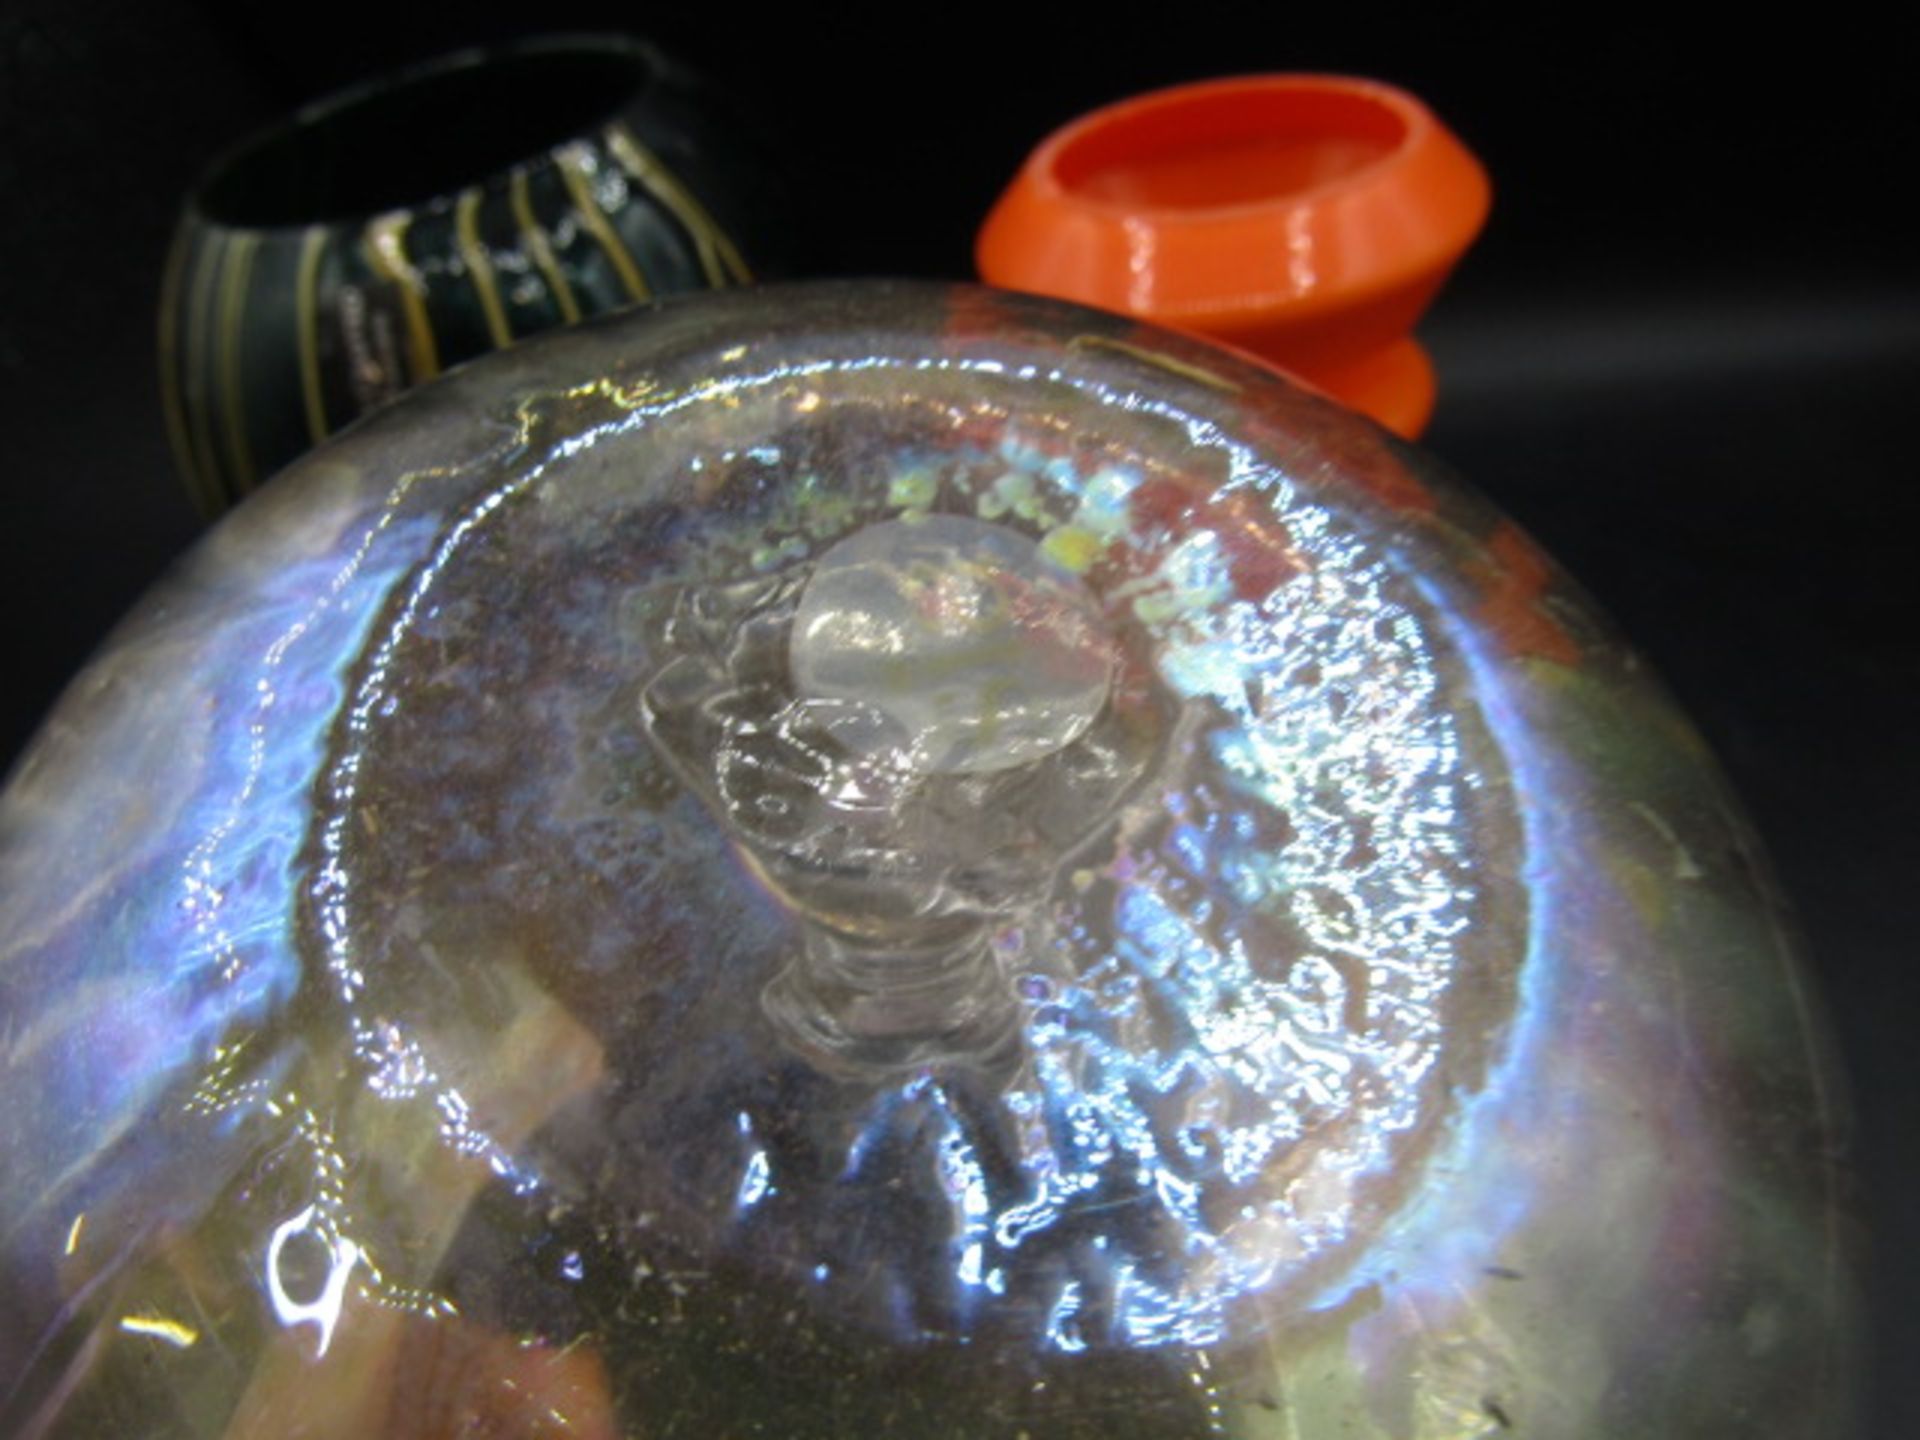 Art glass vases inc iridescent hand blown vase and a Wedgwood vase Orange vase has nibbles around - Image 3 of 9